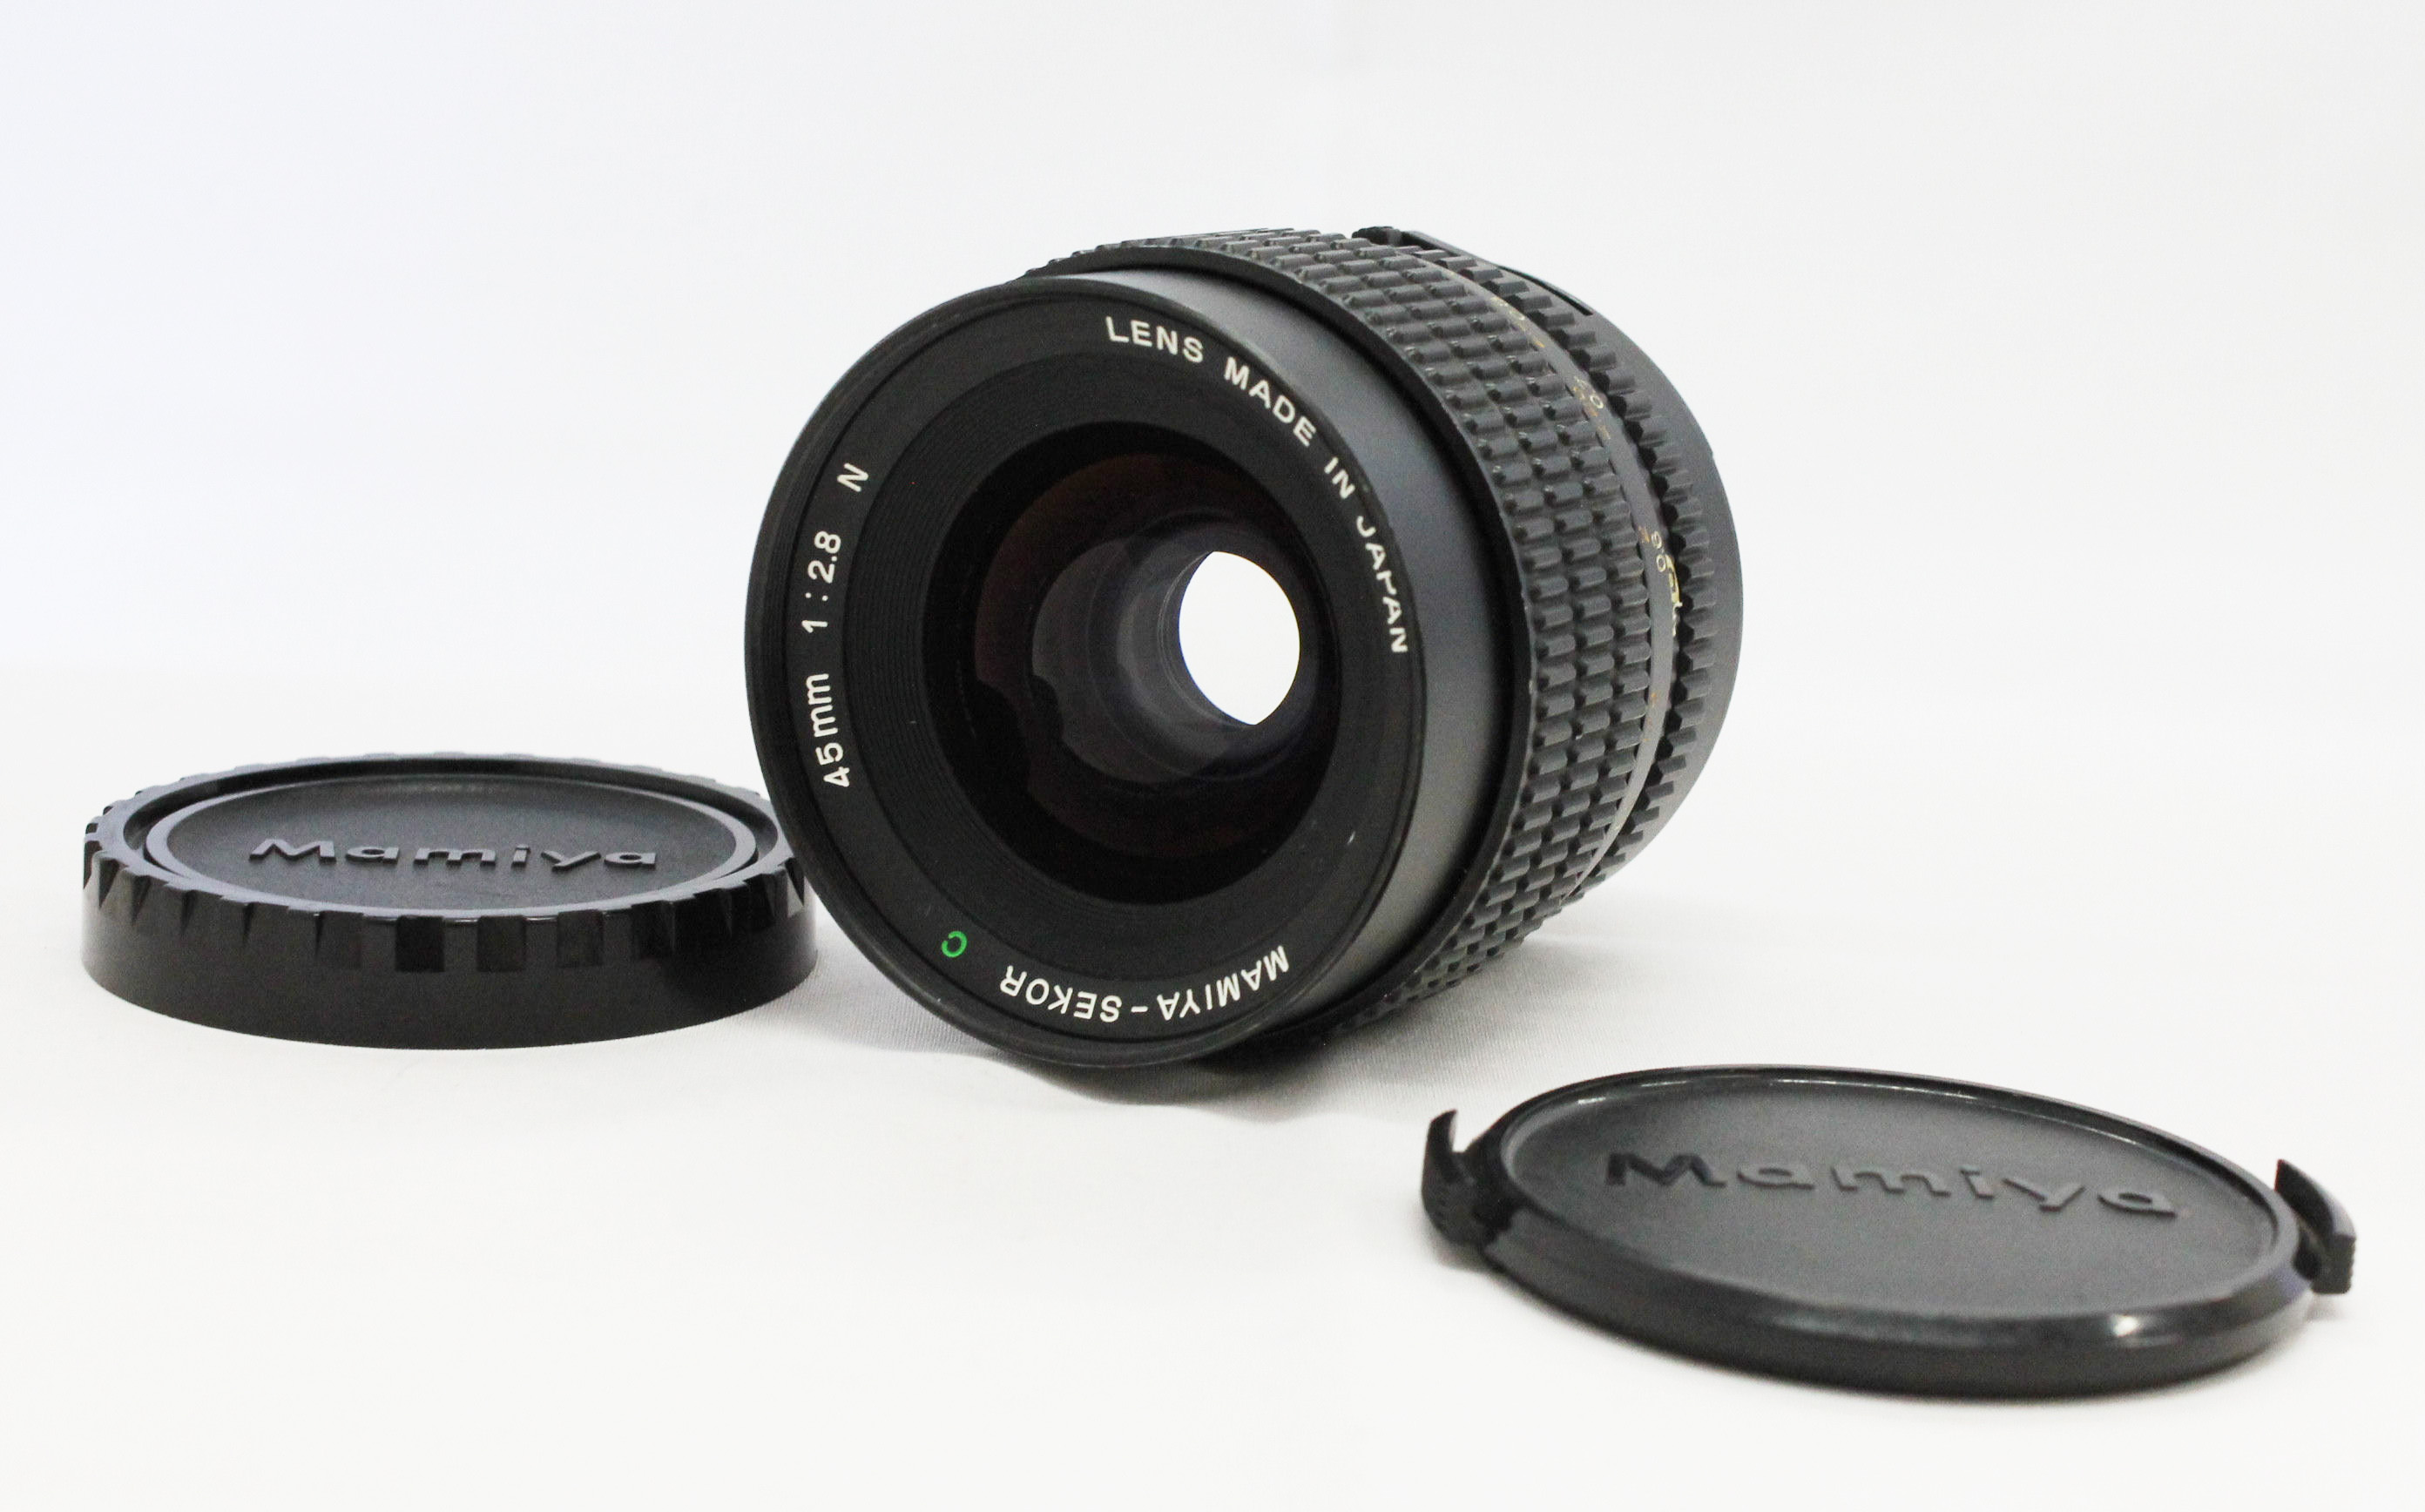 Japan Used Camera Shop | [Excellent+++++] Mamiya-Sekor C 45mm F/2.8 N Lens for 645 1000s Pro from Japan